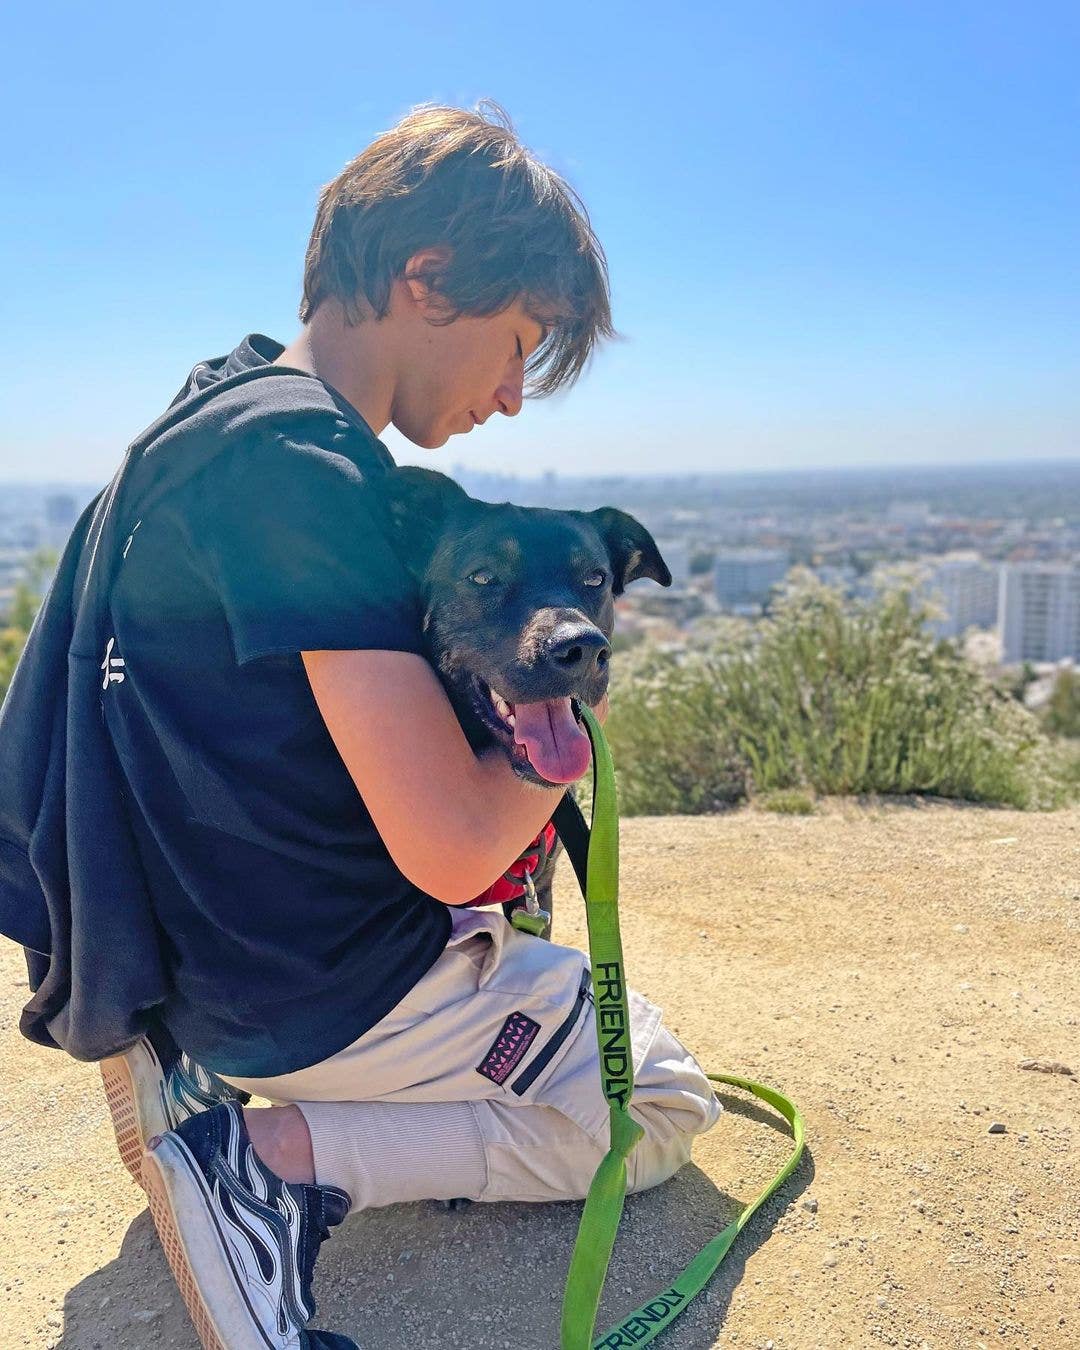 Hiking with Rescue Dogs 2022